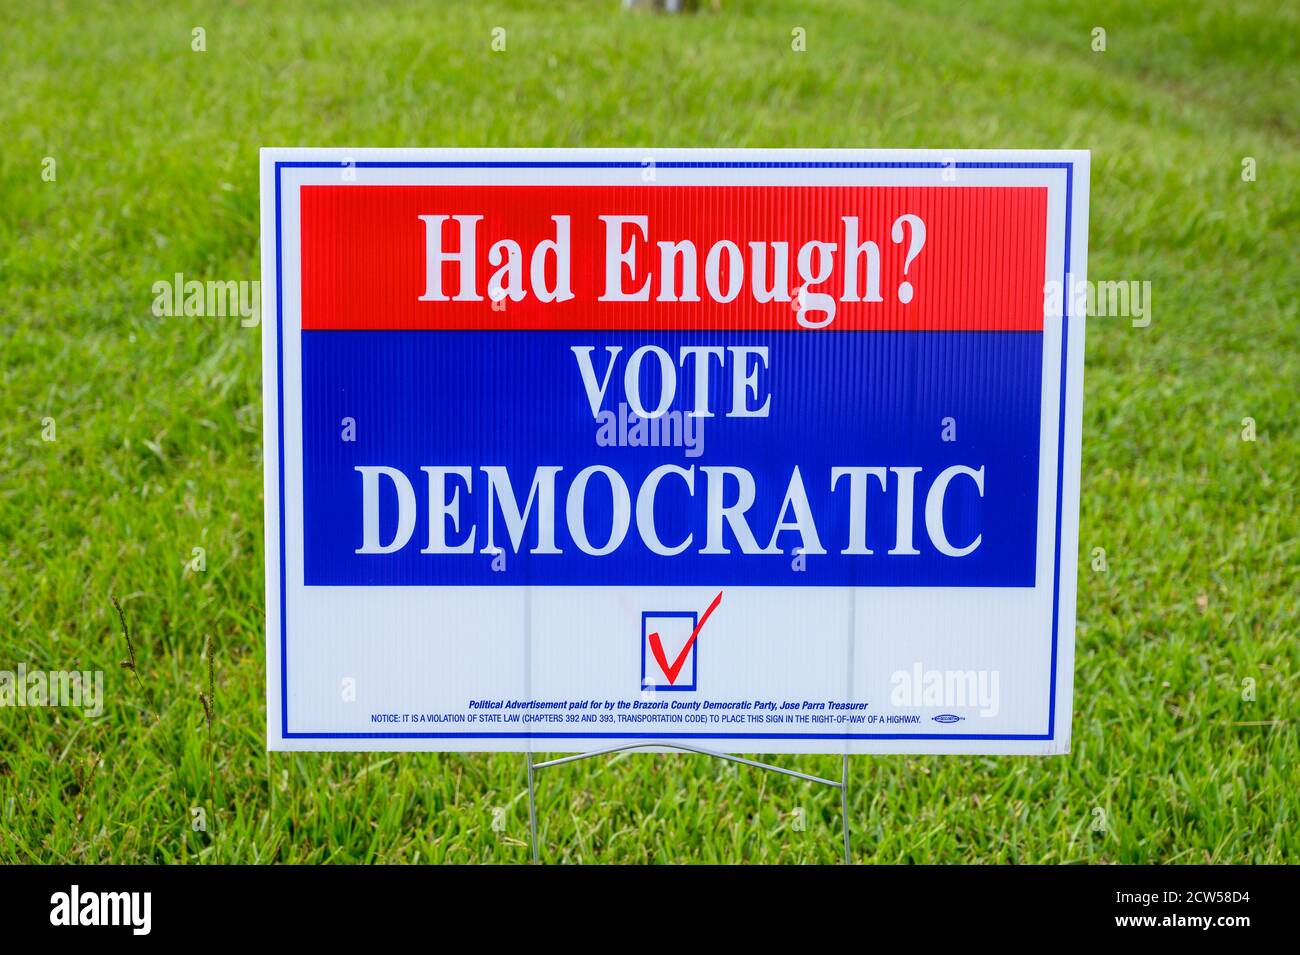 Stafford Texas - September 27, 2020: HAD ENOUGH? VOTE DEMOCRATIC election signs are seen in many residential areas in Texas Stock Photo